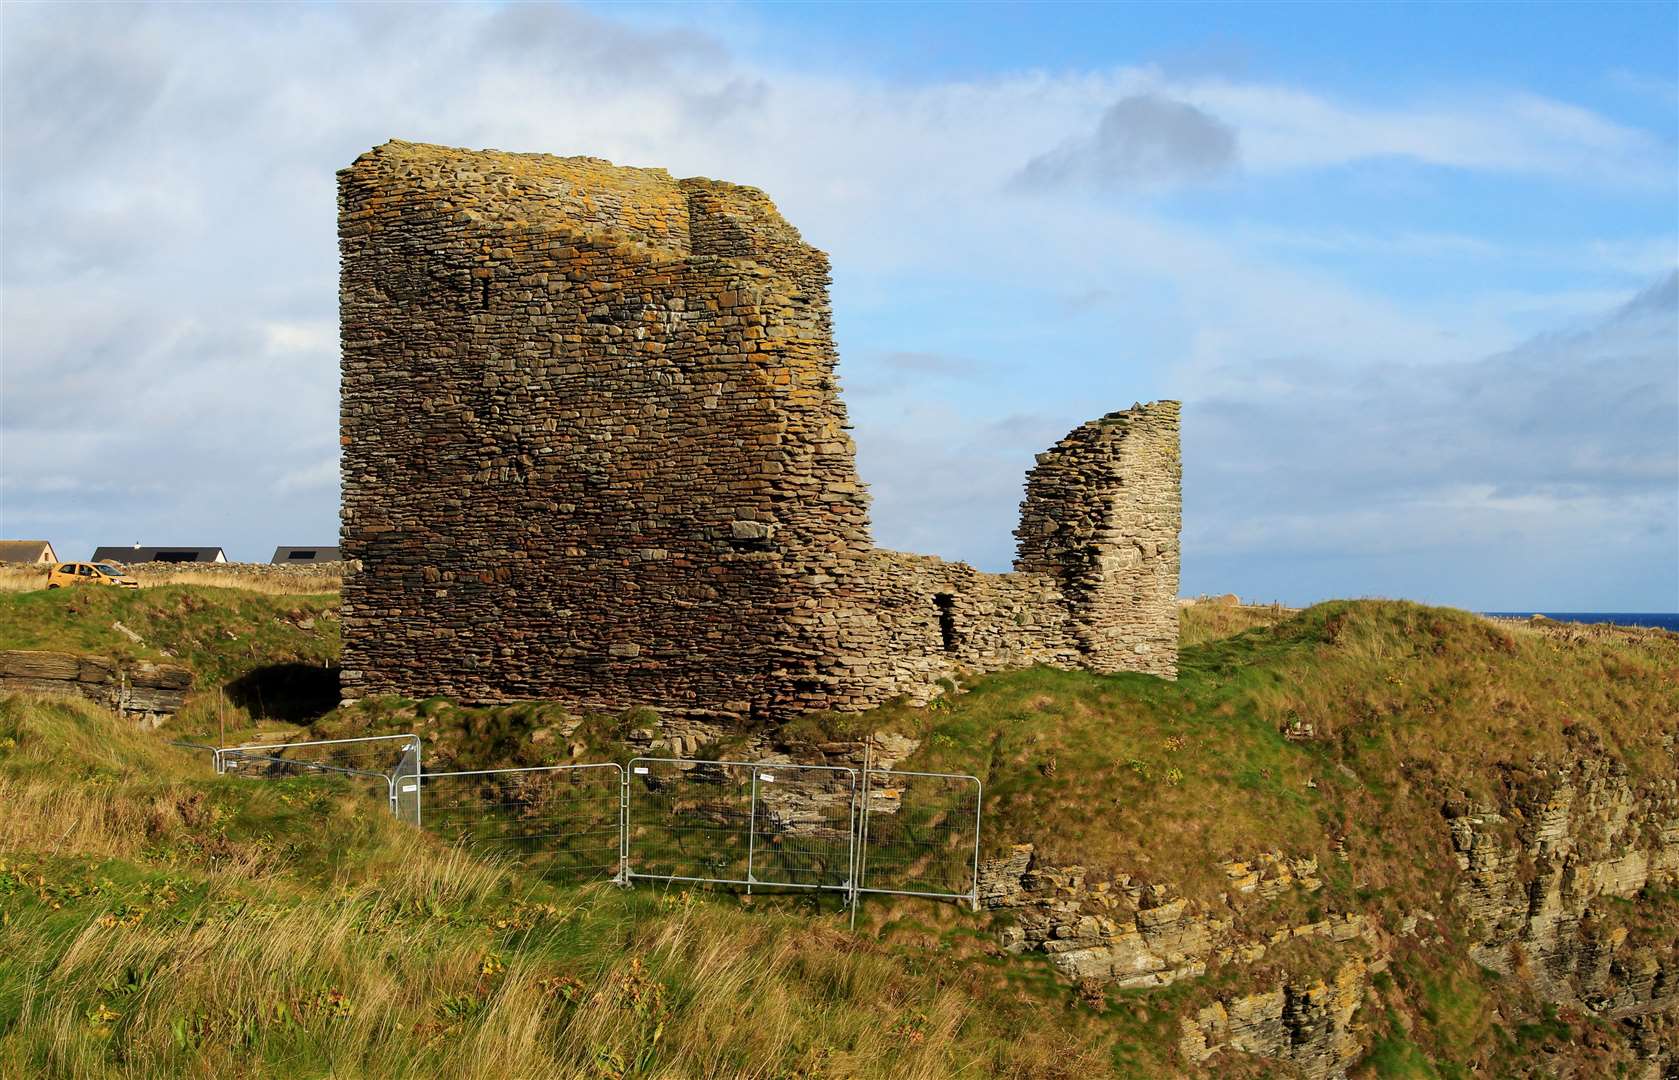 Fencing was put in place across the promontory on which the castle sits. Picture: Alan Hendry